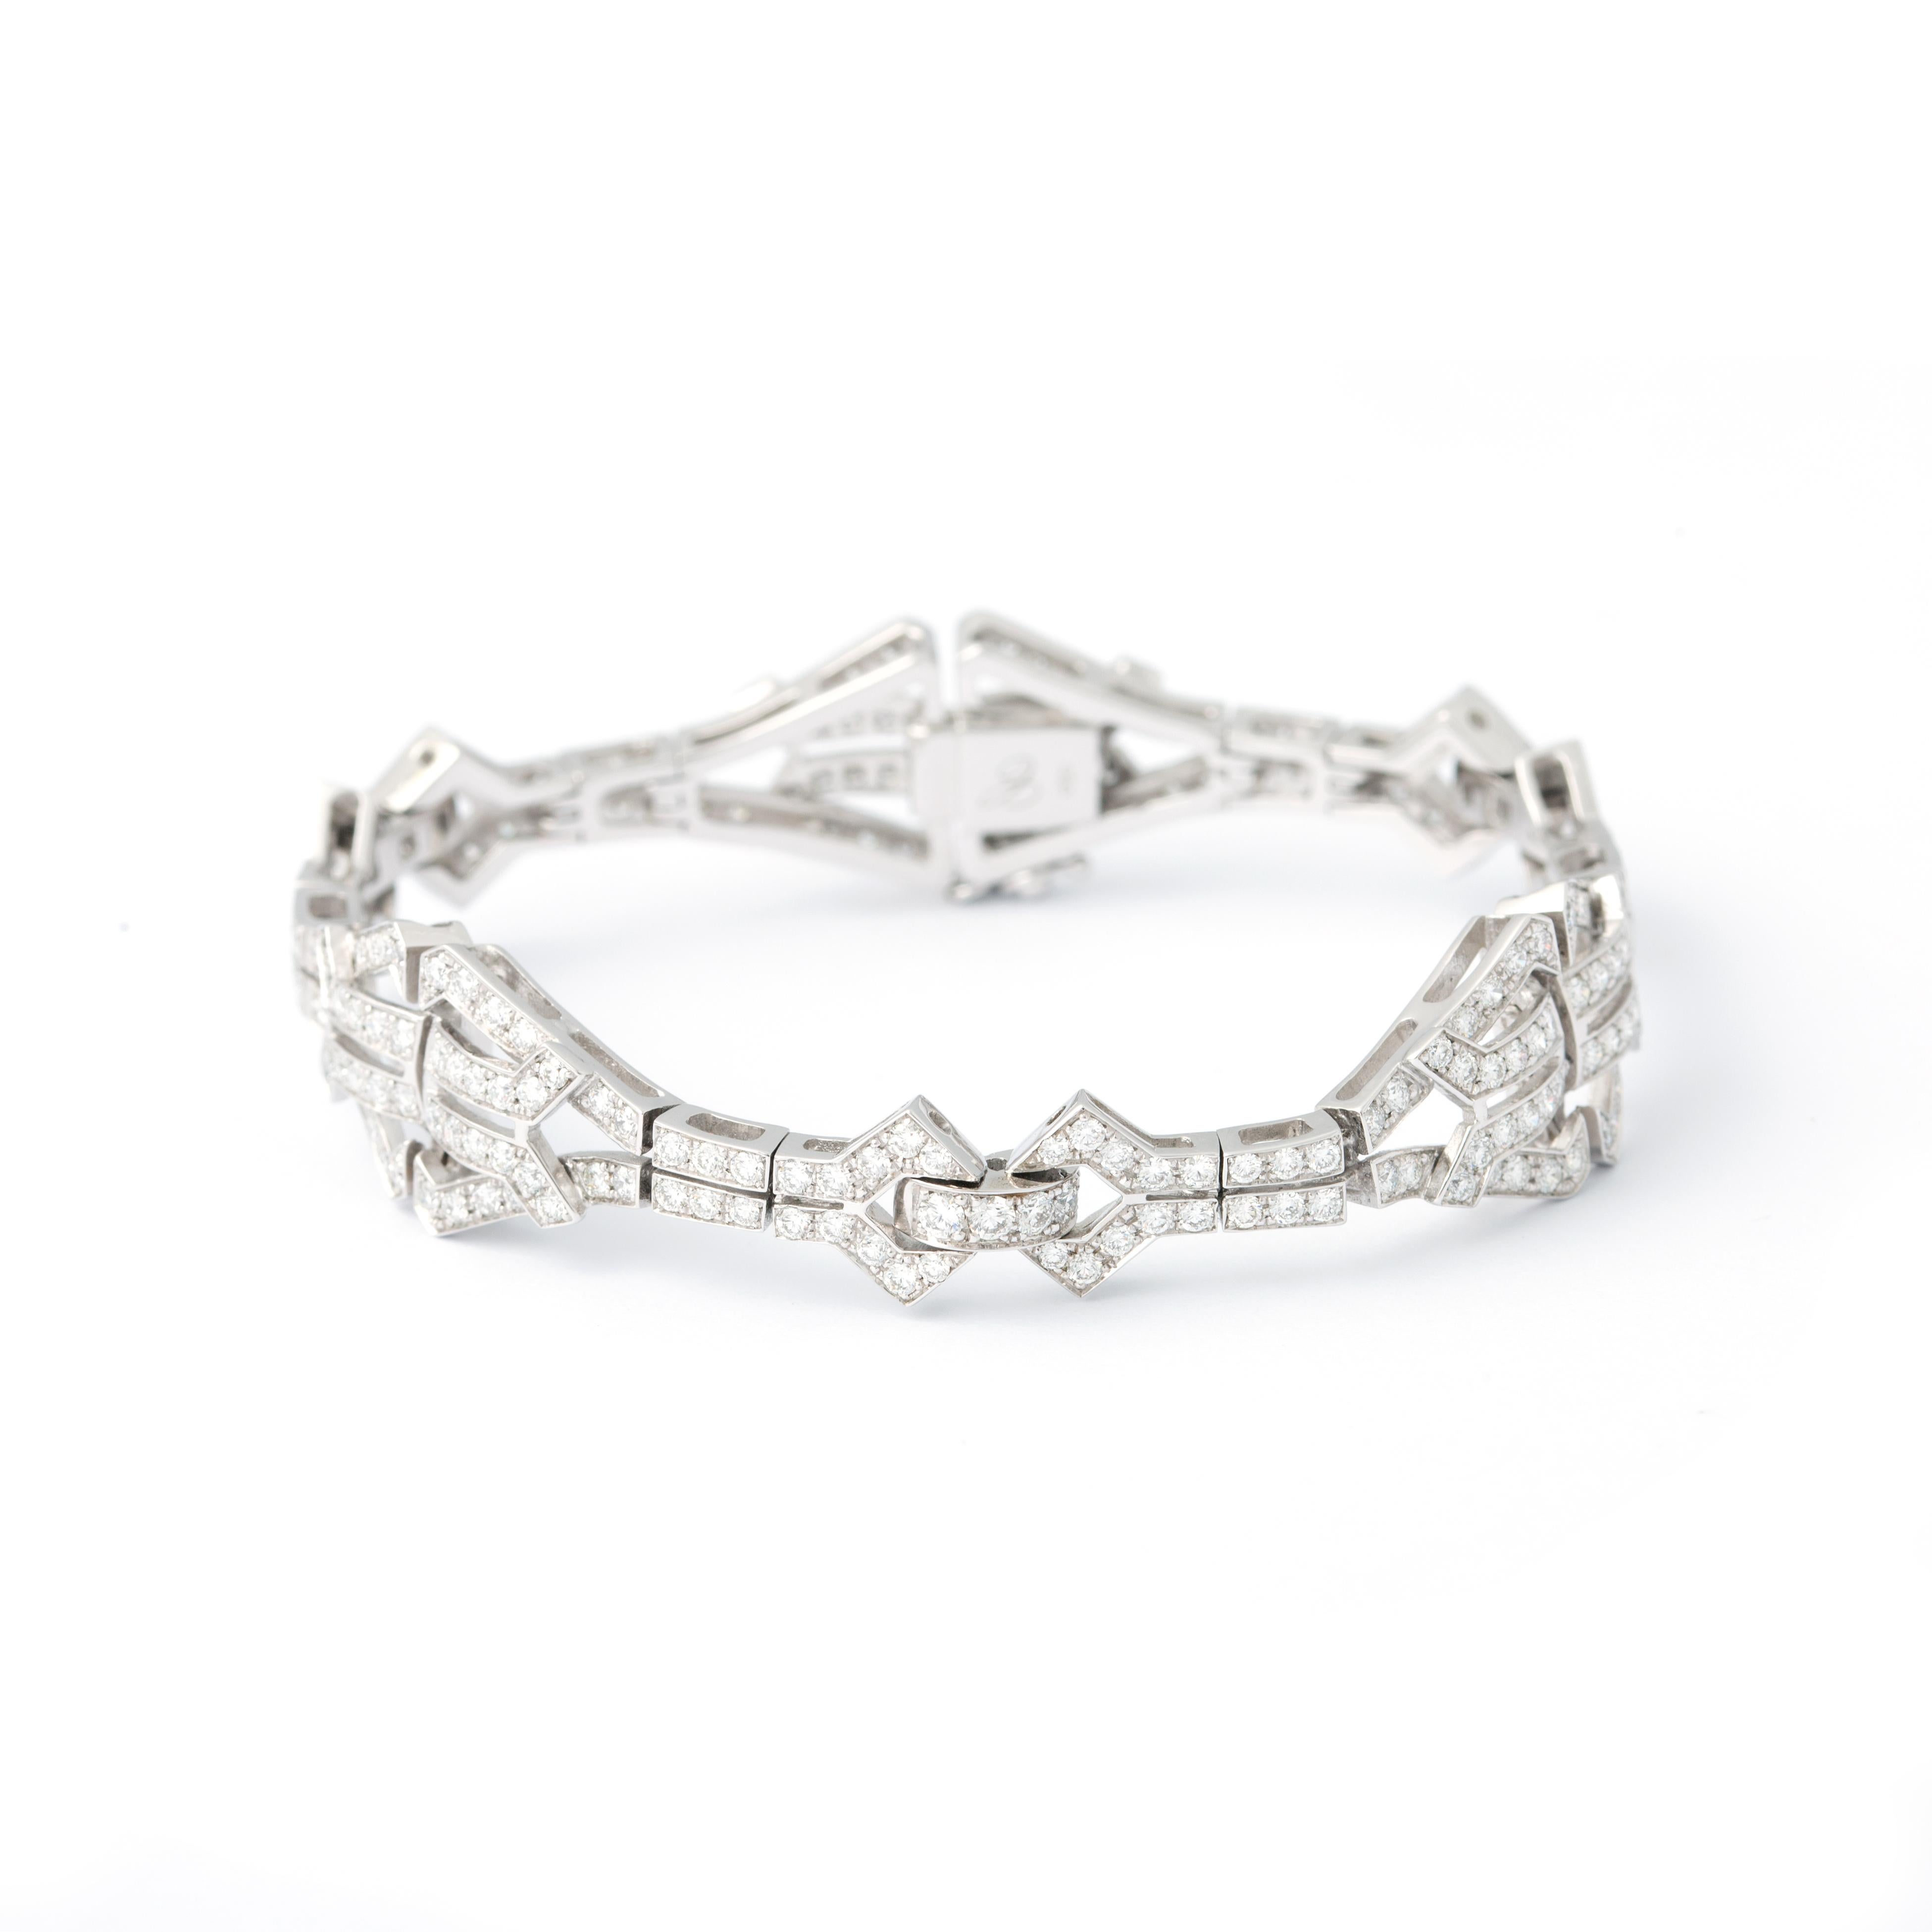 Bracelet in 18kt white gold set with 255 diamonds 4.52 cts.

Length: 17.50 centimeters (6.89 inches).

Width on the top : 1.40 centimeters (0.55 inches).

Total weight: 25.51 grams. 